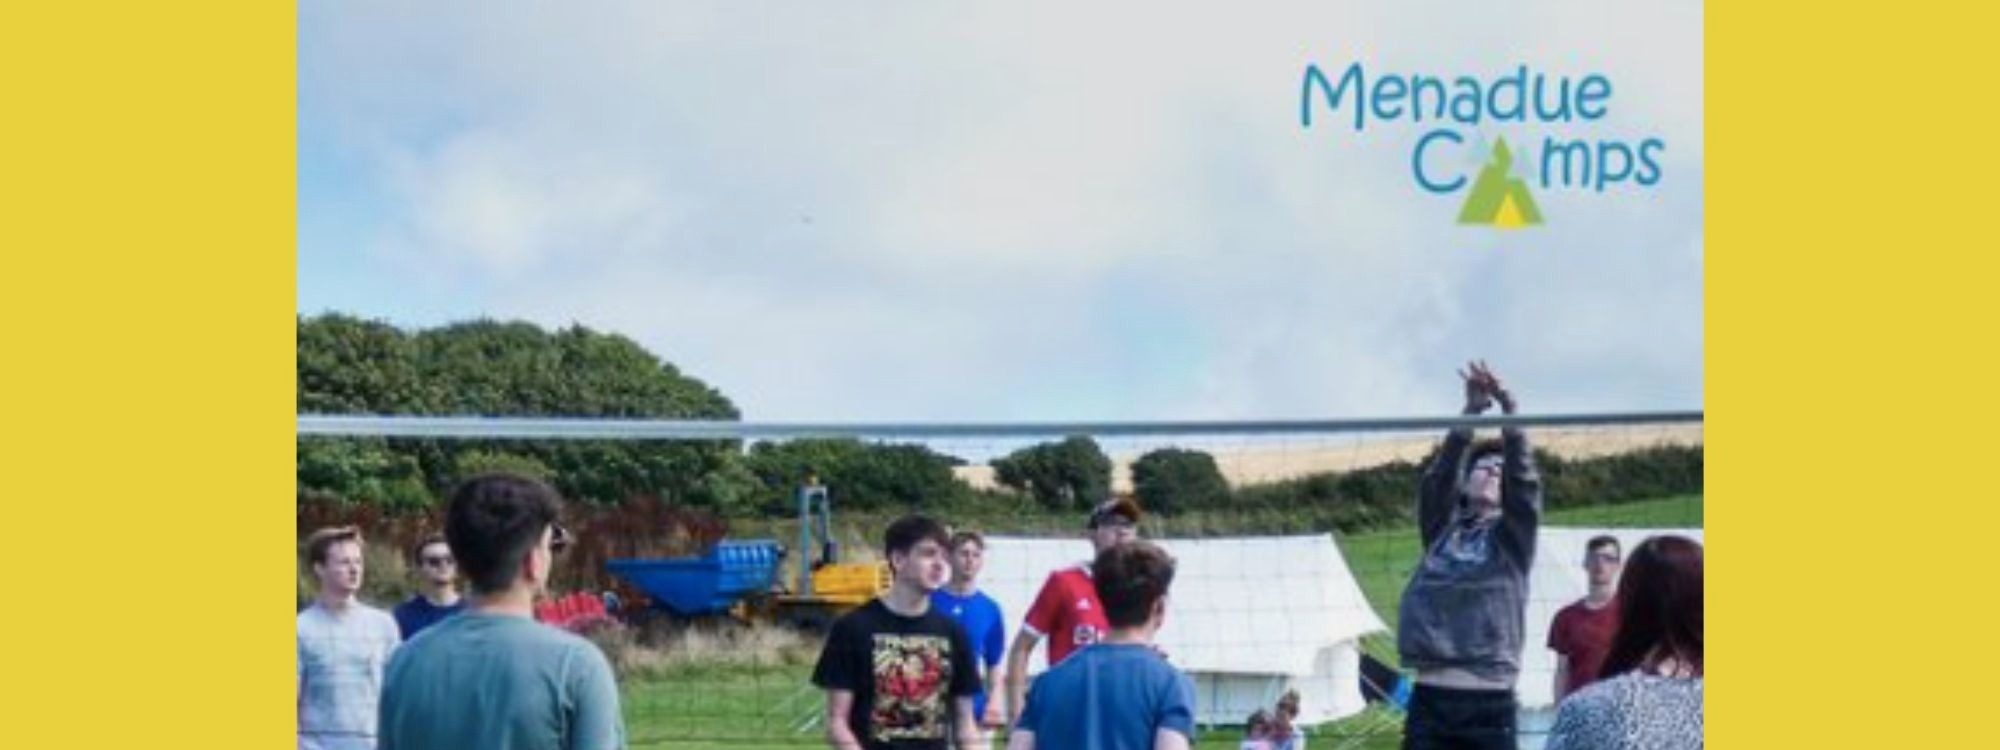 Equip Camp for 15-17's
*3 - 10 August 2024 - Book Today!*www.menaduecamp.org.uk